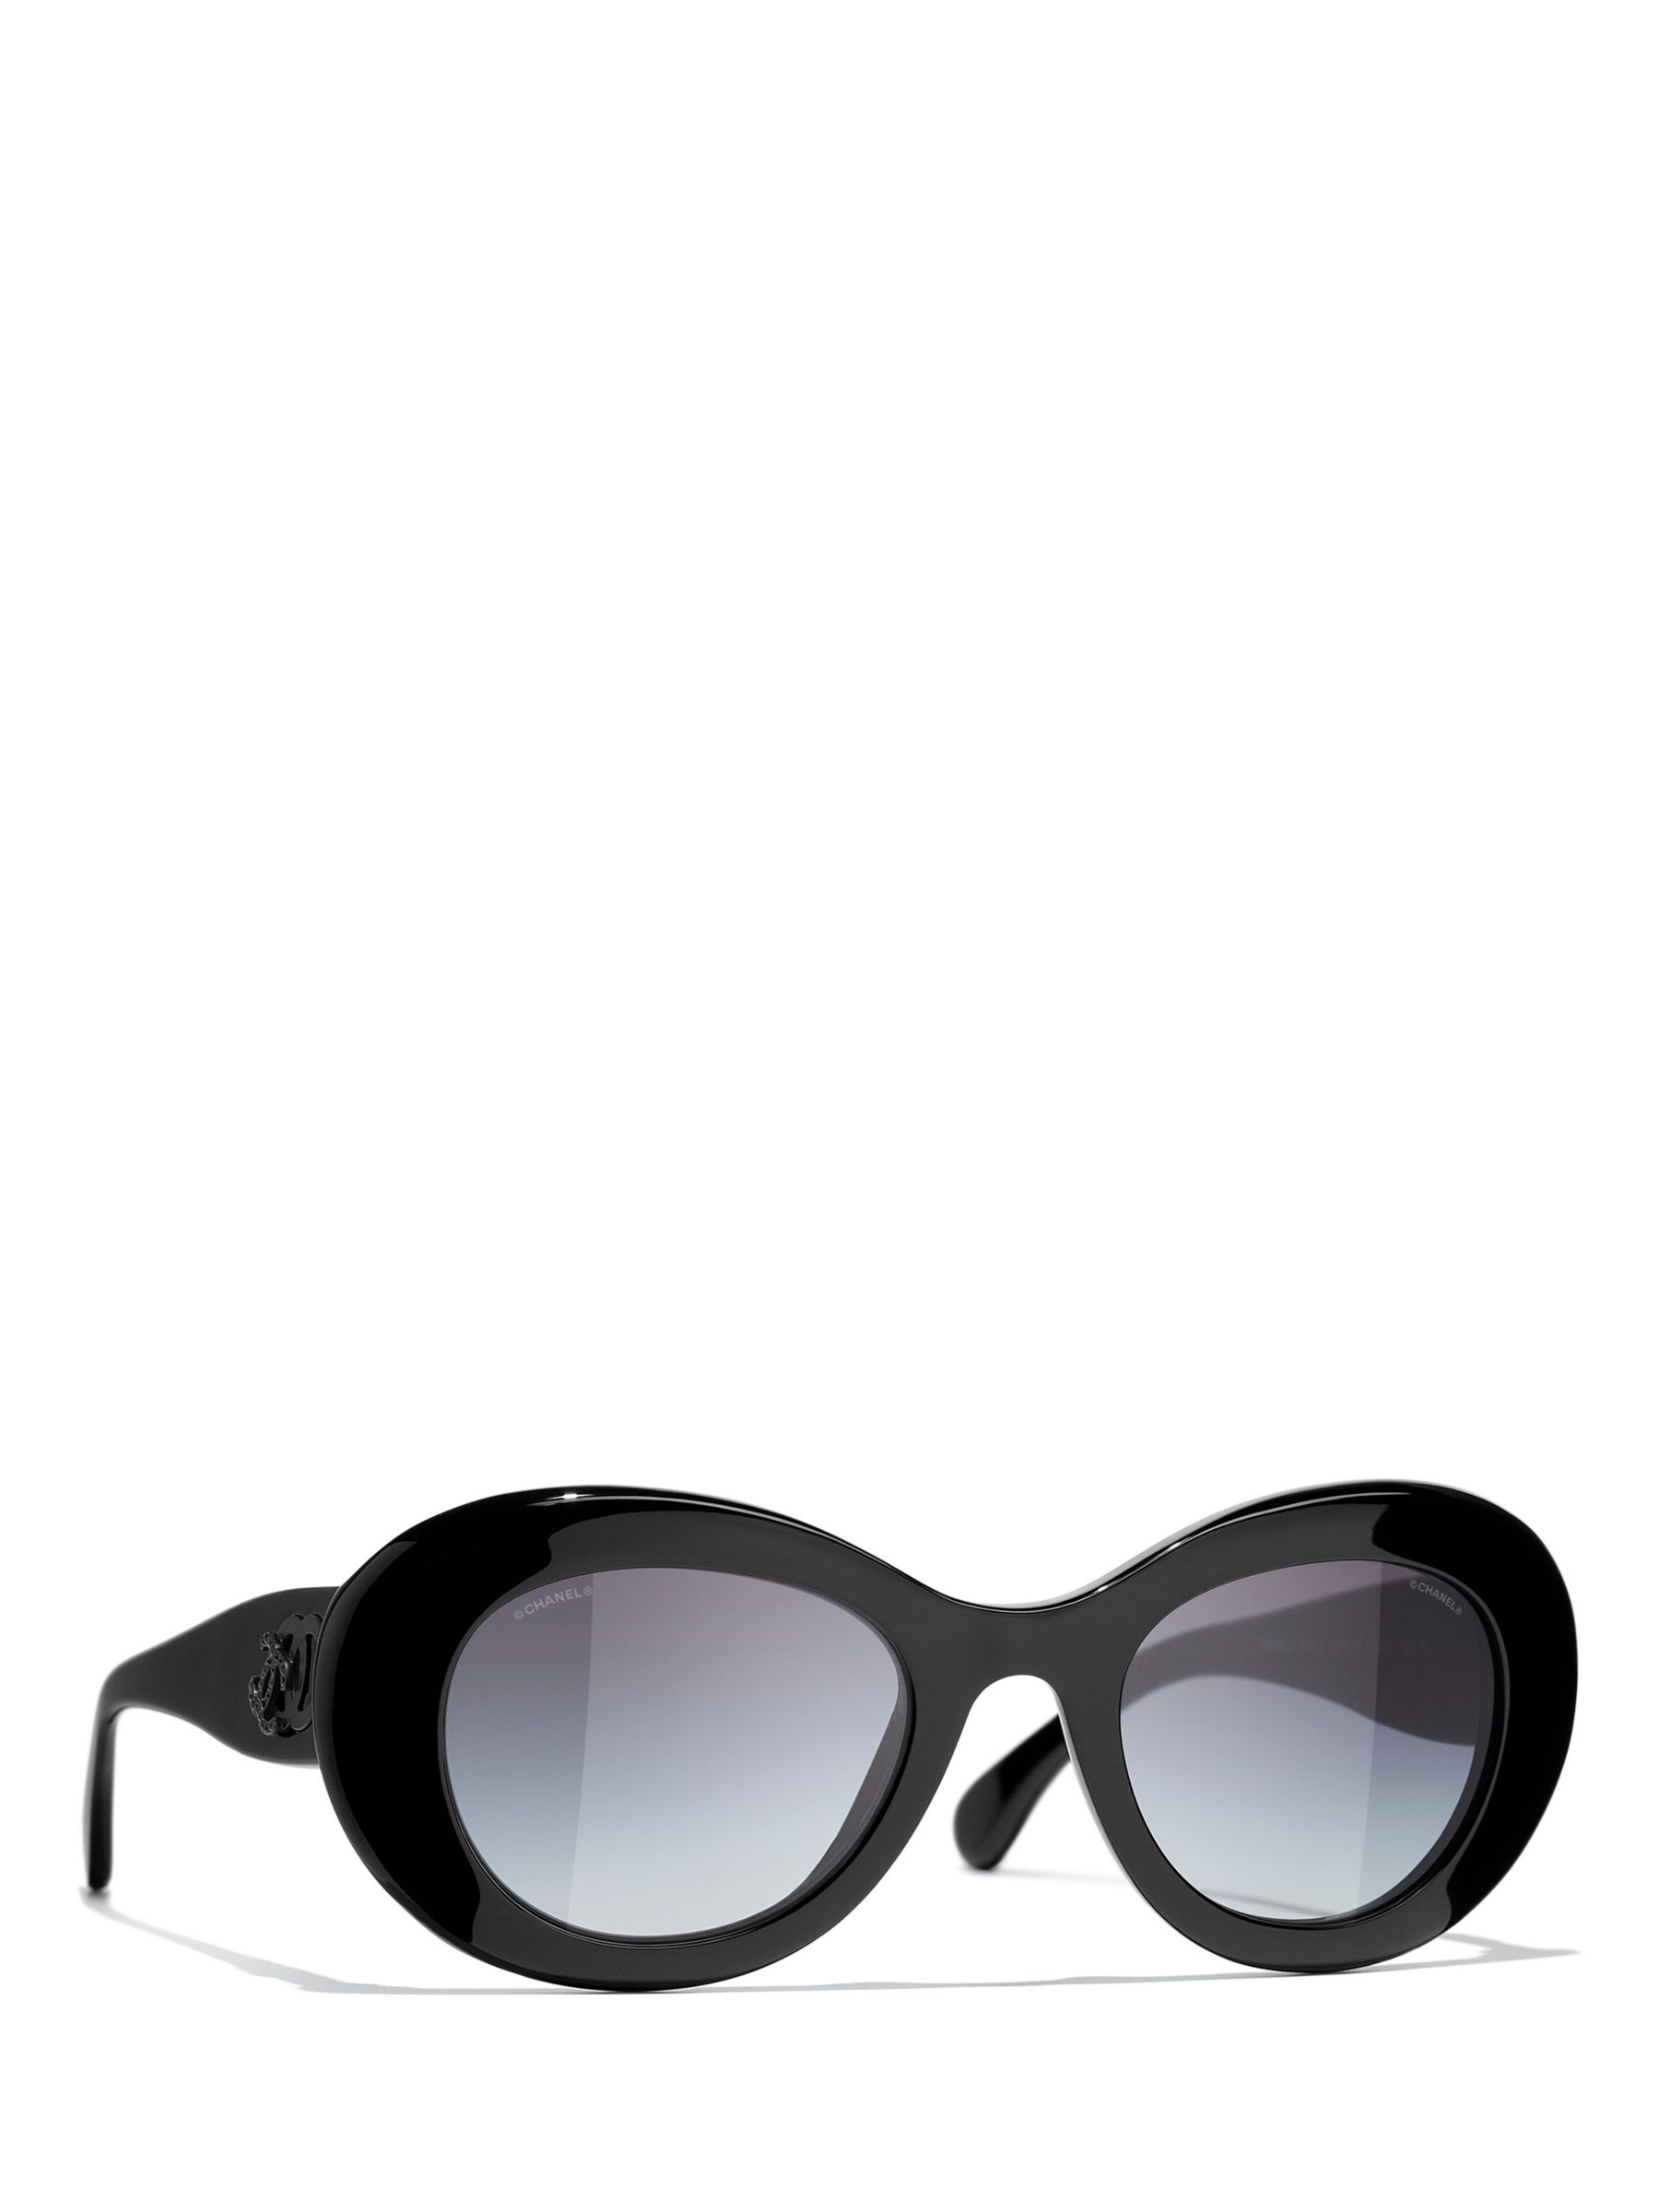 CHANEL Oval Sunglasses CH5469B Black/Grey Gradient at John Lewis & Partners